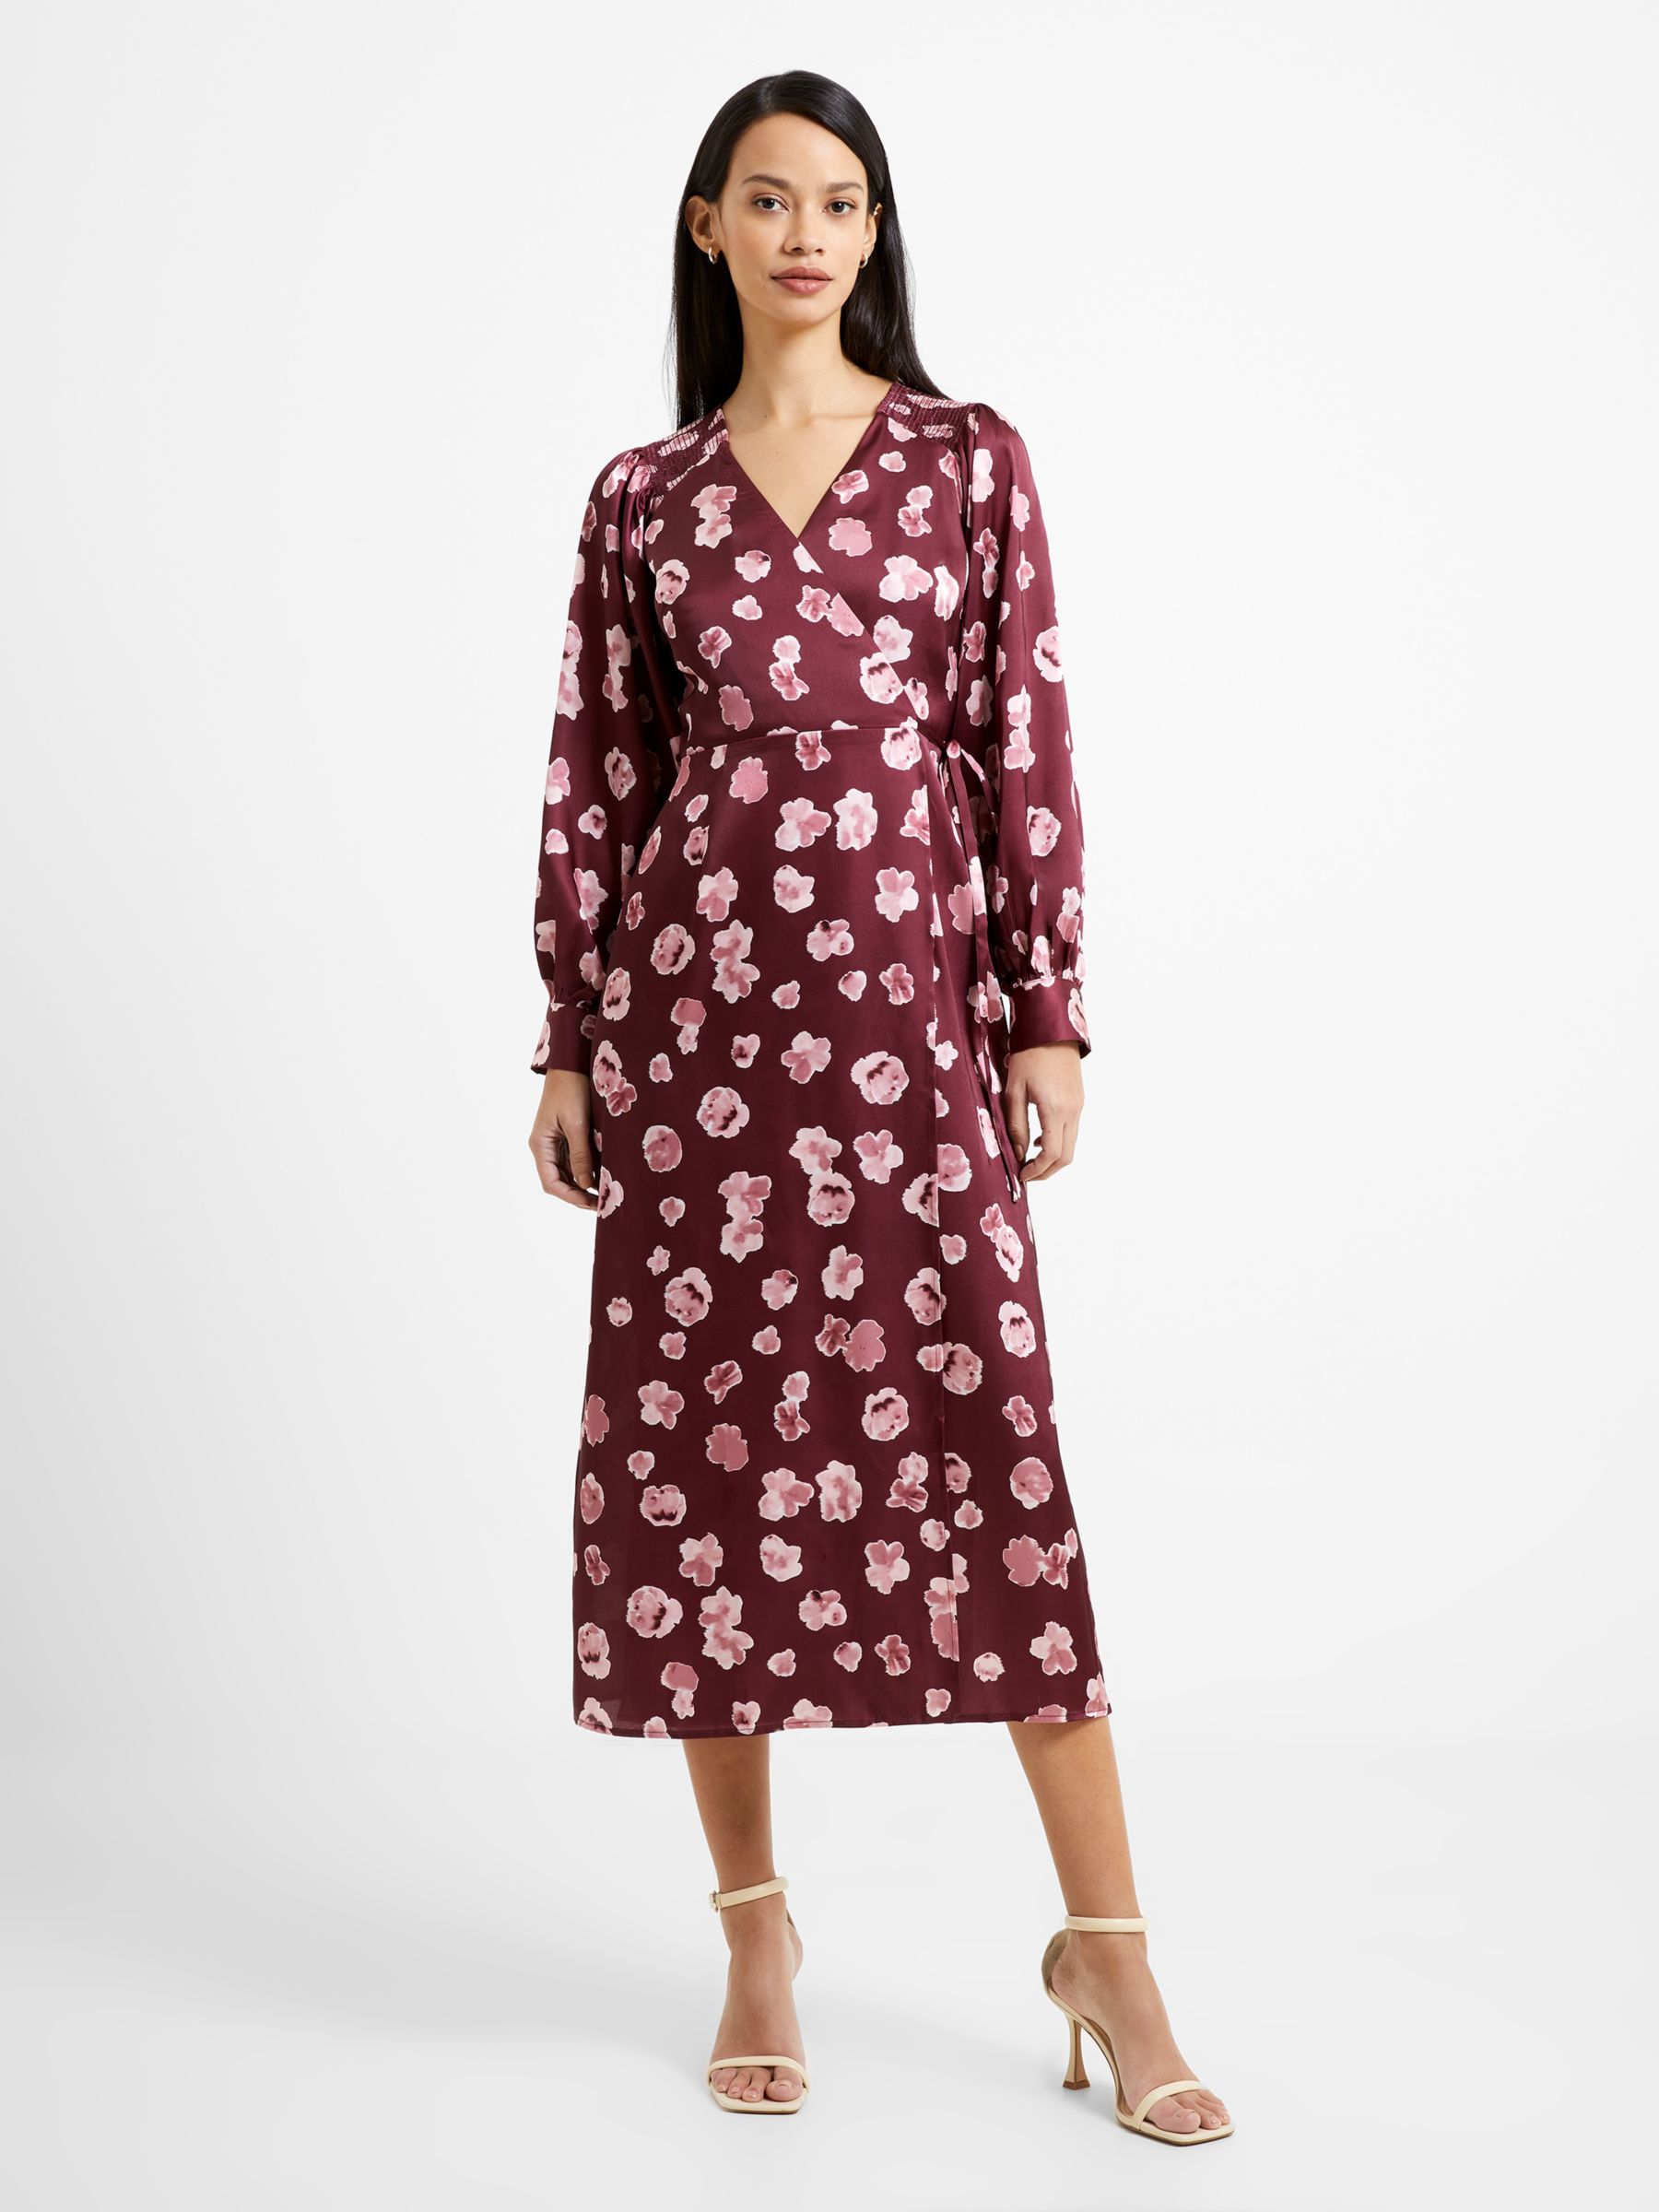 French Connection Bronwen Floral Satin Wrap Dress, Chocolate Truffle, 8